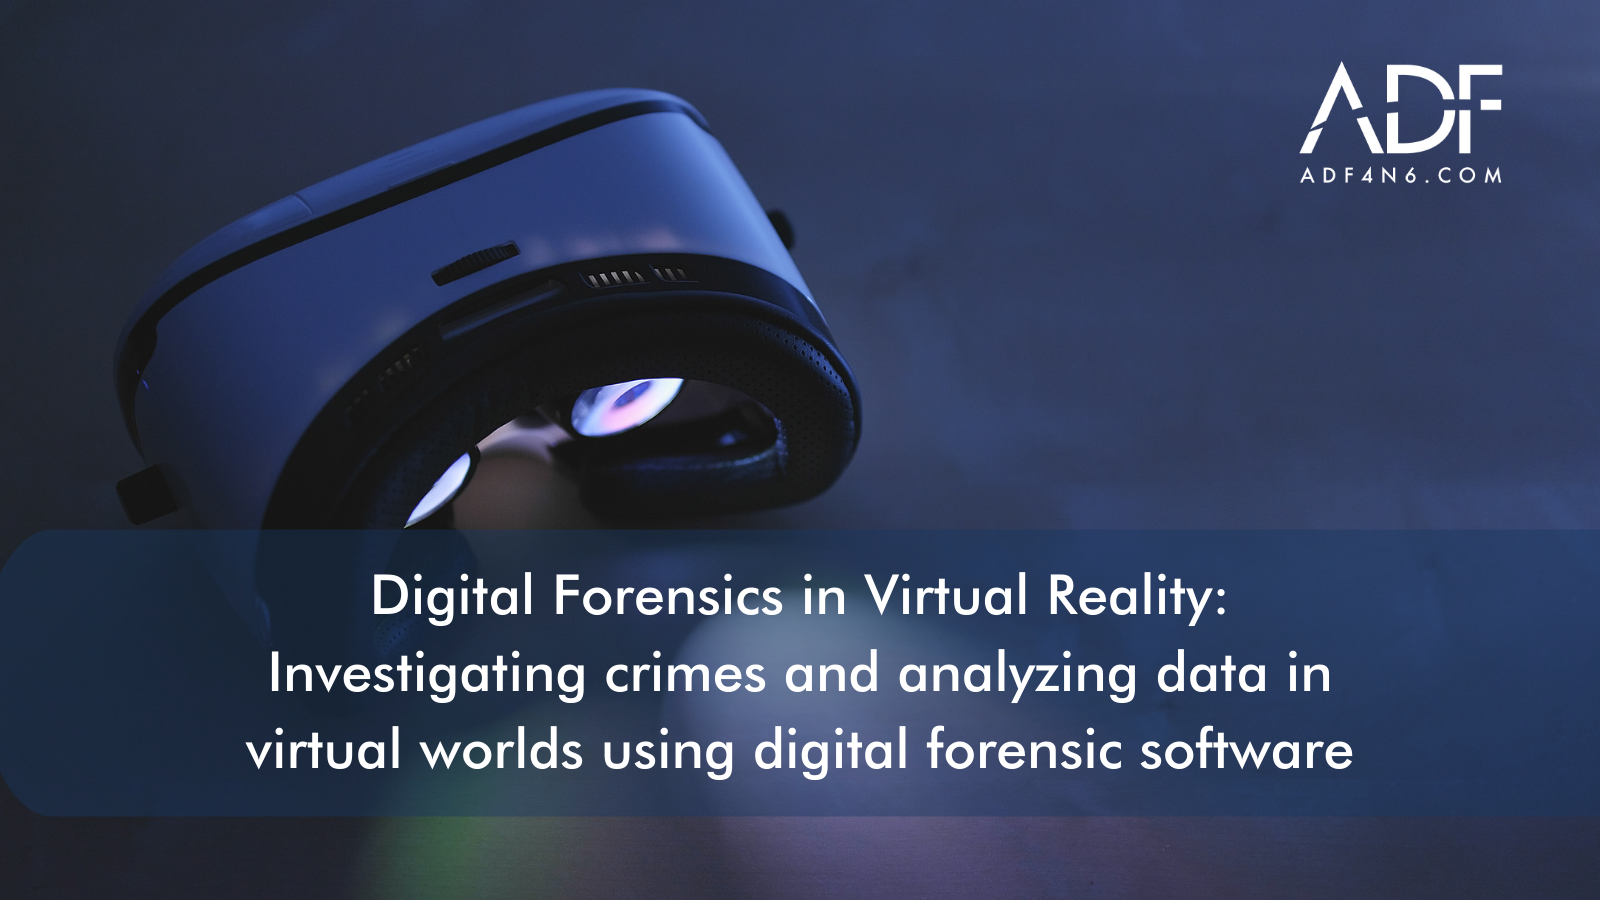 Digital Forensics in Virtual Reality: Investigating crimes and analyzing data in virtual worlds using digital forensic software